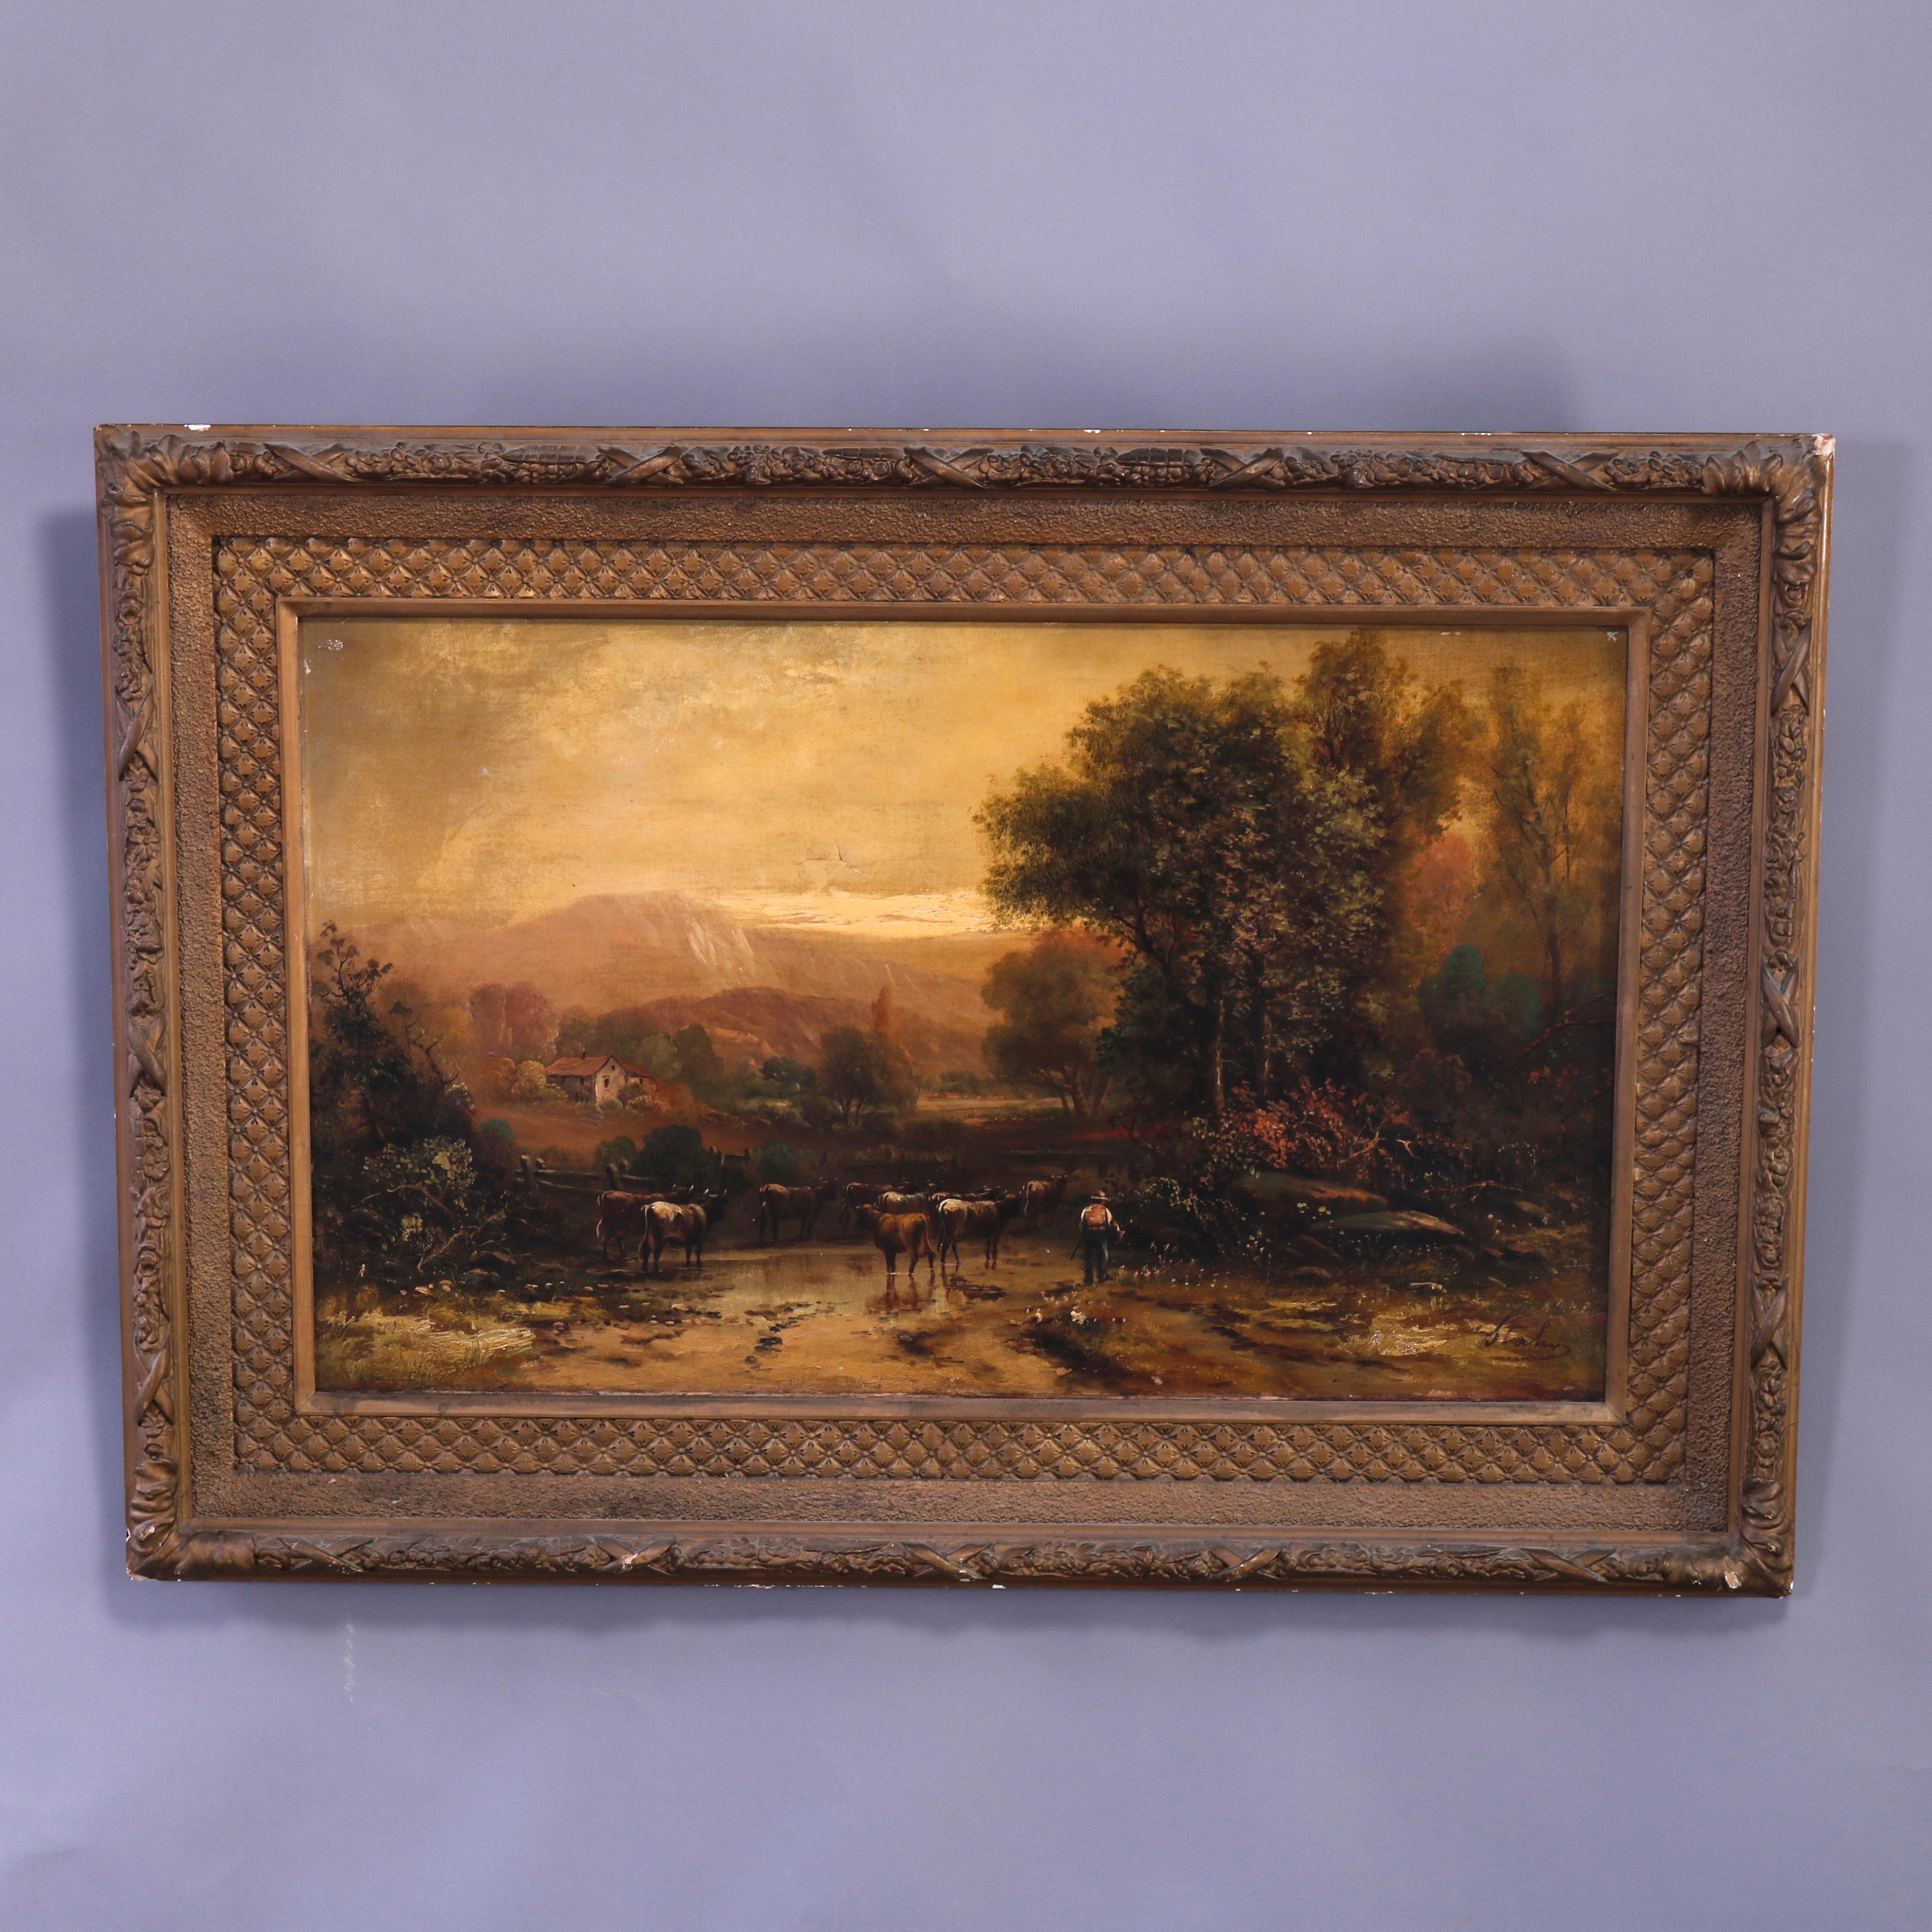 An large antique landscape panting offers oil on canvas pastoral scene with cattle, figures, and structure having mountainous background, artist signed illegible lower right, seated in giltwood frame, c1890

Measures - overall 32.25''H x 46''W x